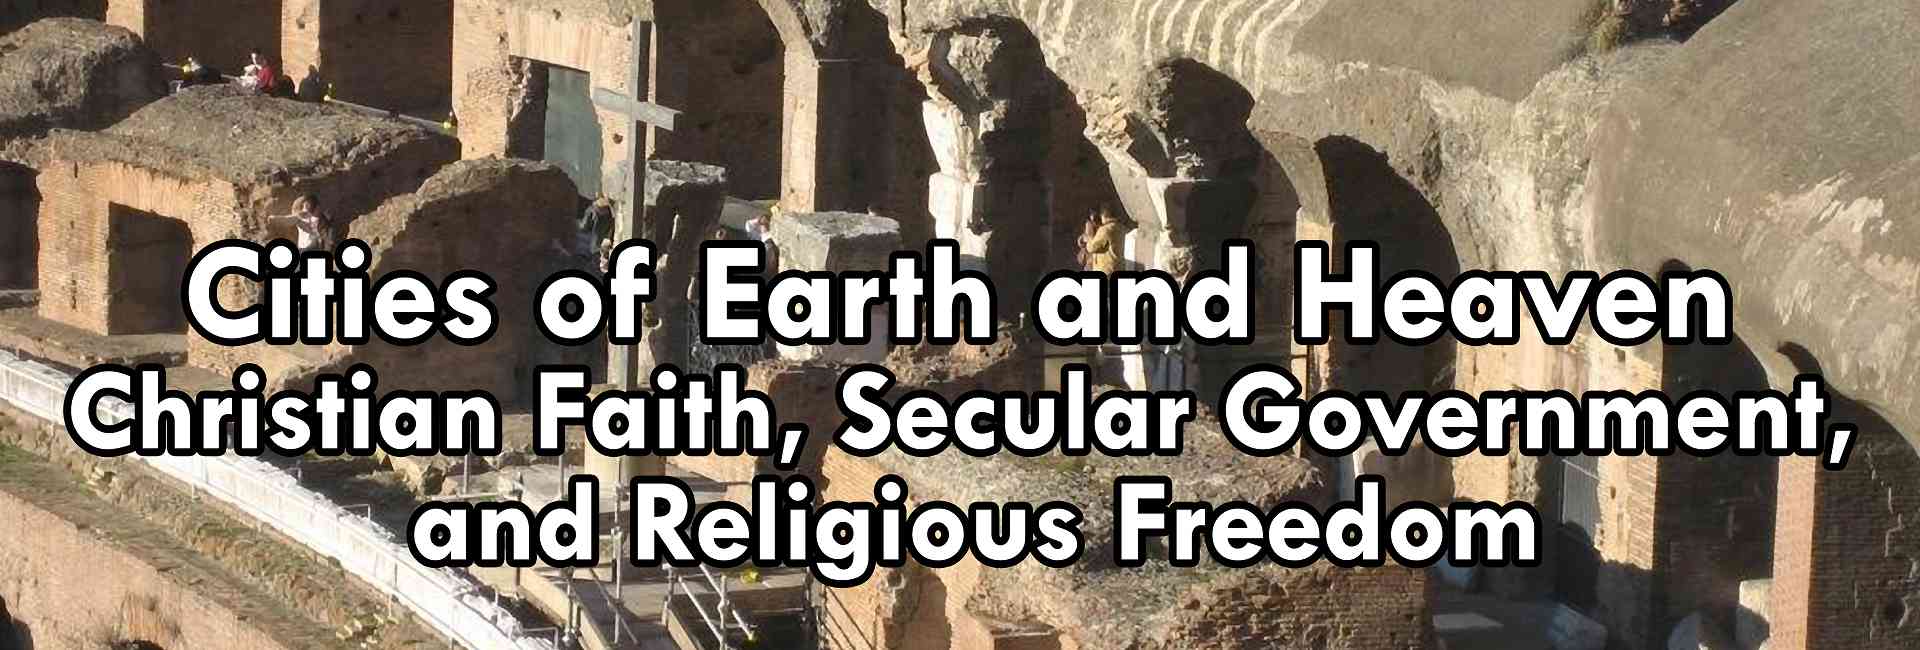 Cities of Earth and Heaven: Christian Faith, Secular Government, and Religious Freedom